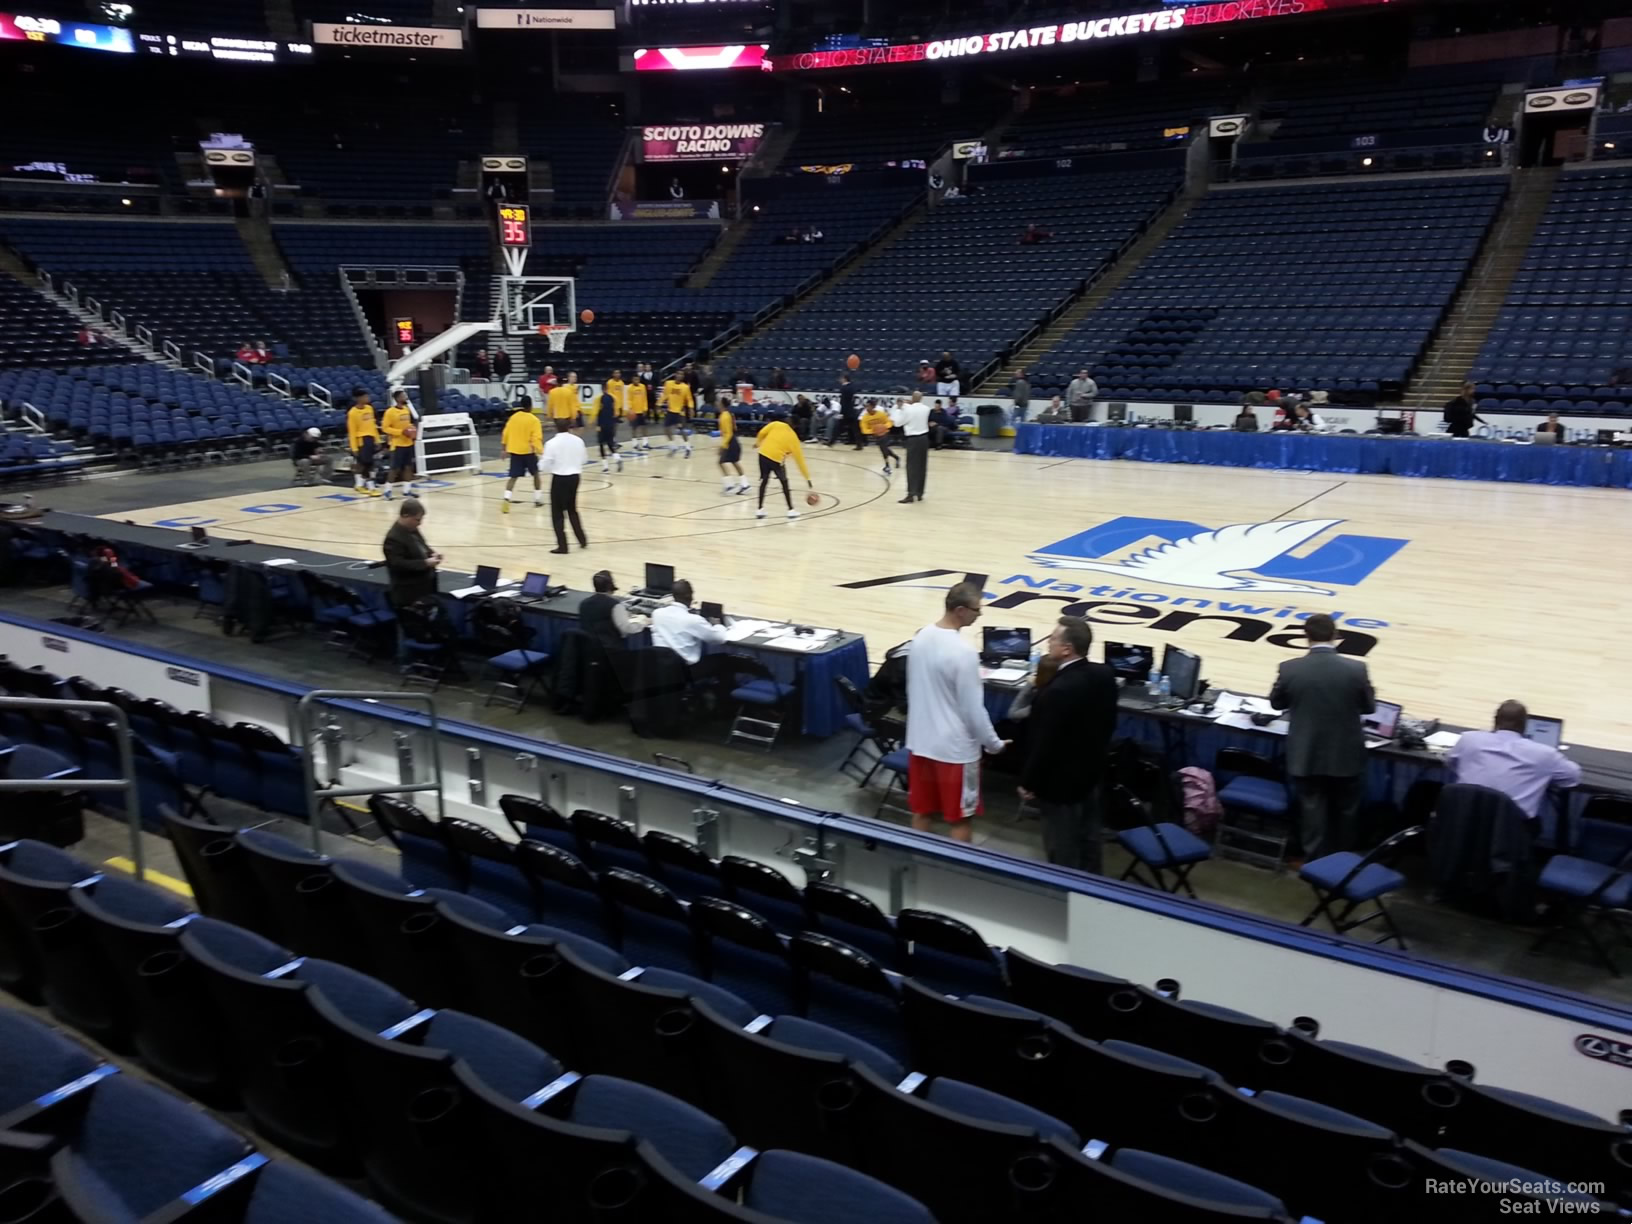 section 114, row g seat view  for basketball - nationwide arena